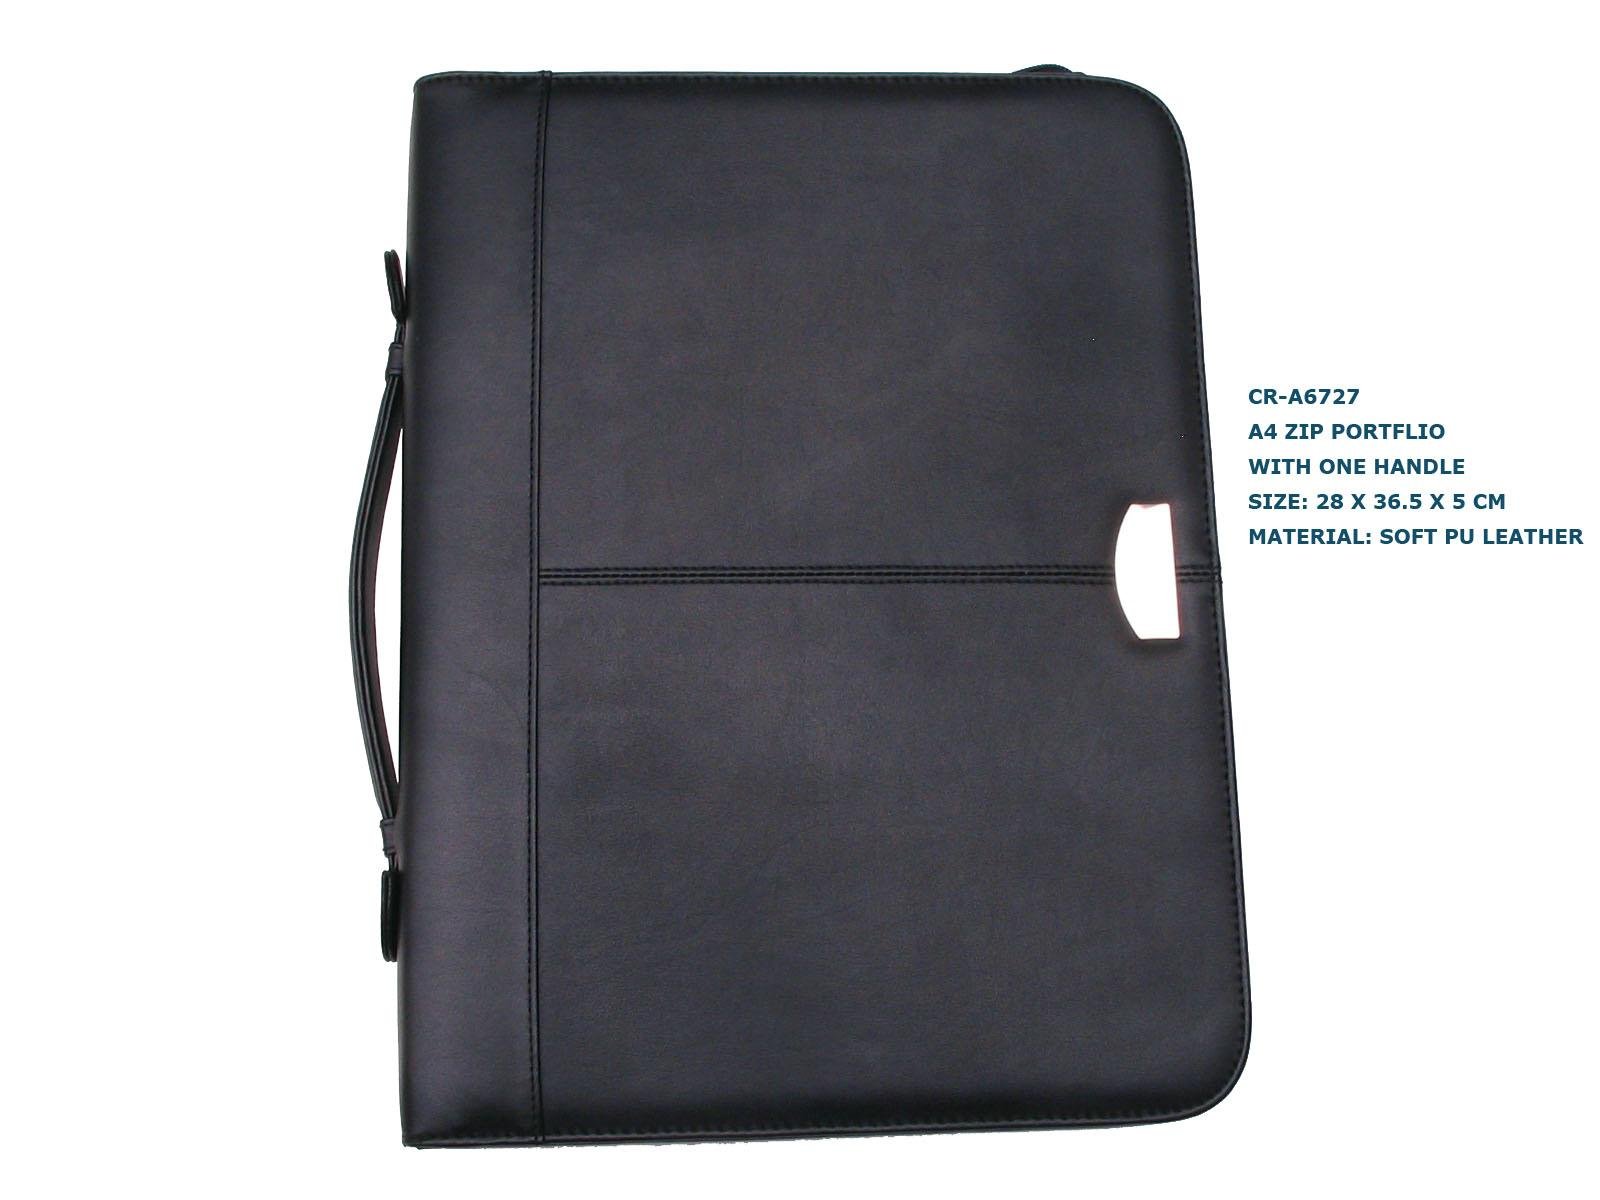 A4 2 ring binder zip portfolio with one handle item:CR-A6727